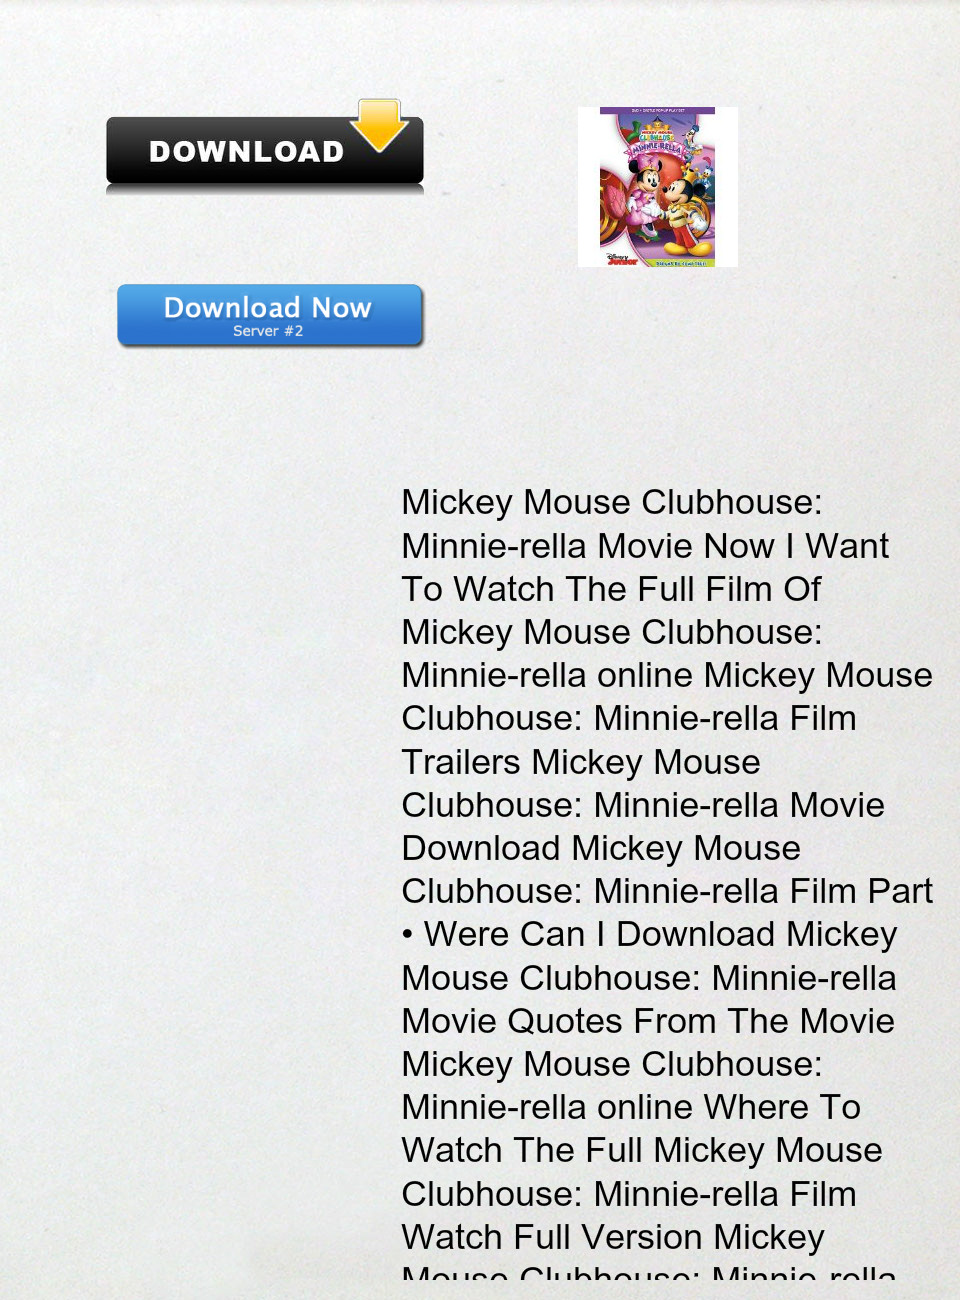 Mickey mouse clubhouse season 1 torrent download